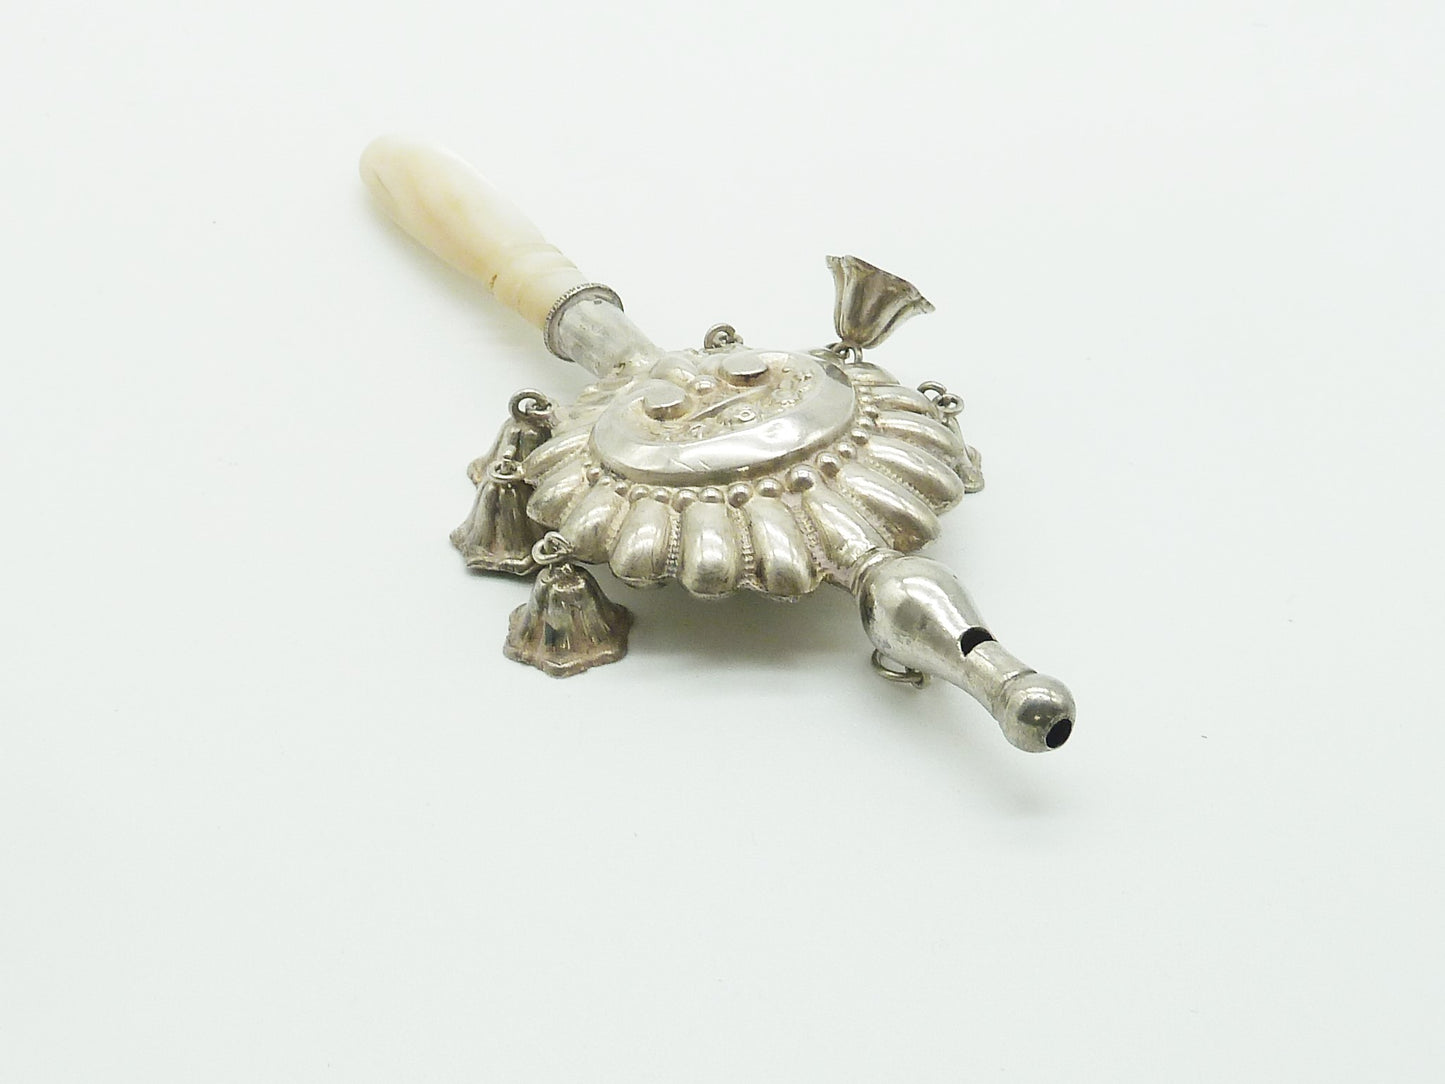 French silver whistle and baby rattle - 43 Chesapeake Court Antiuqes